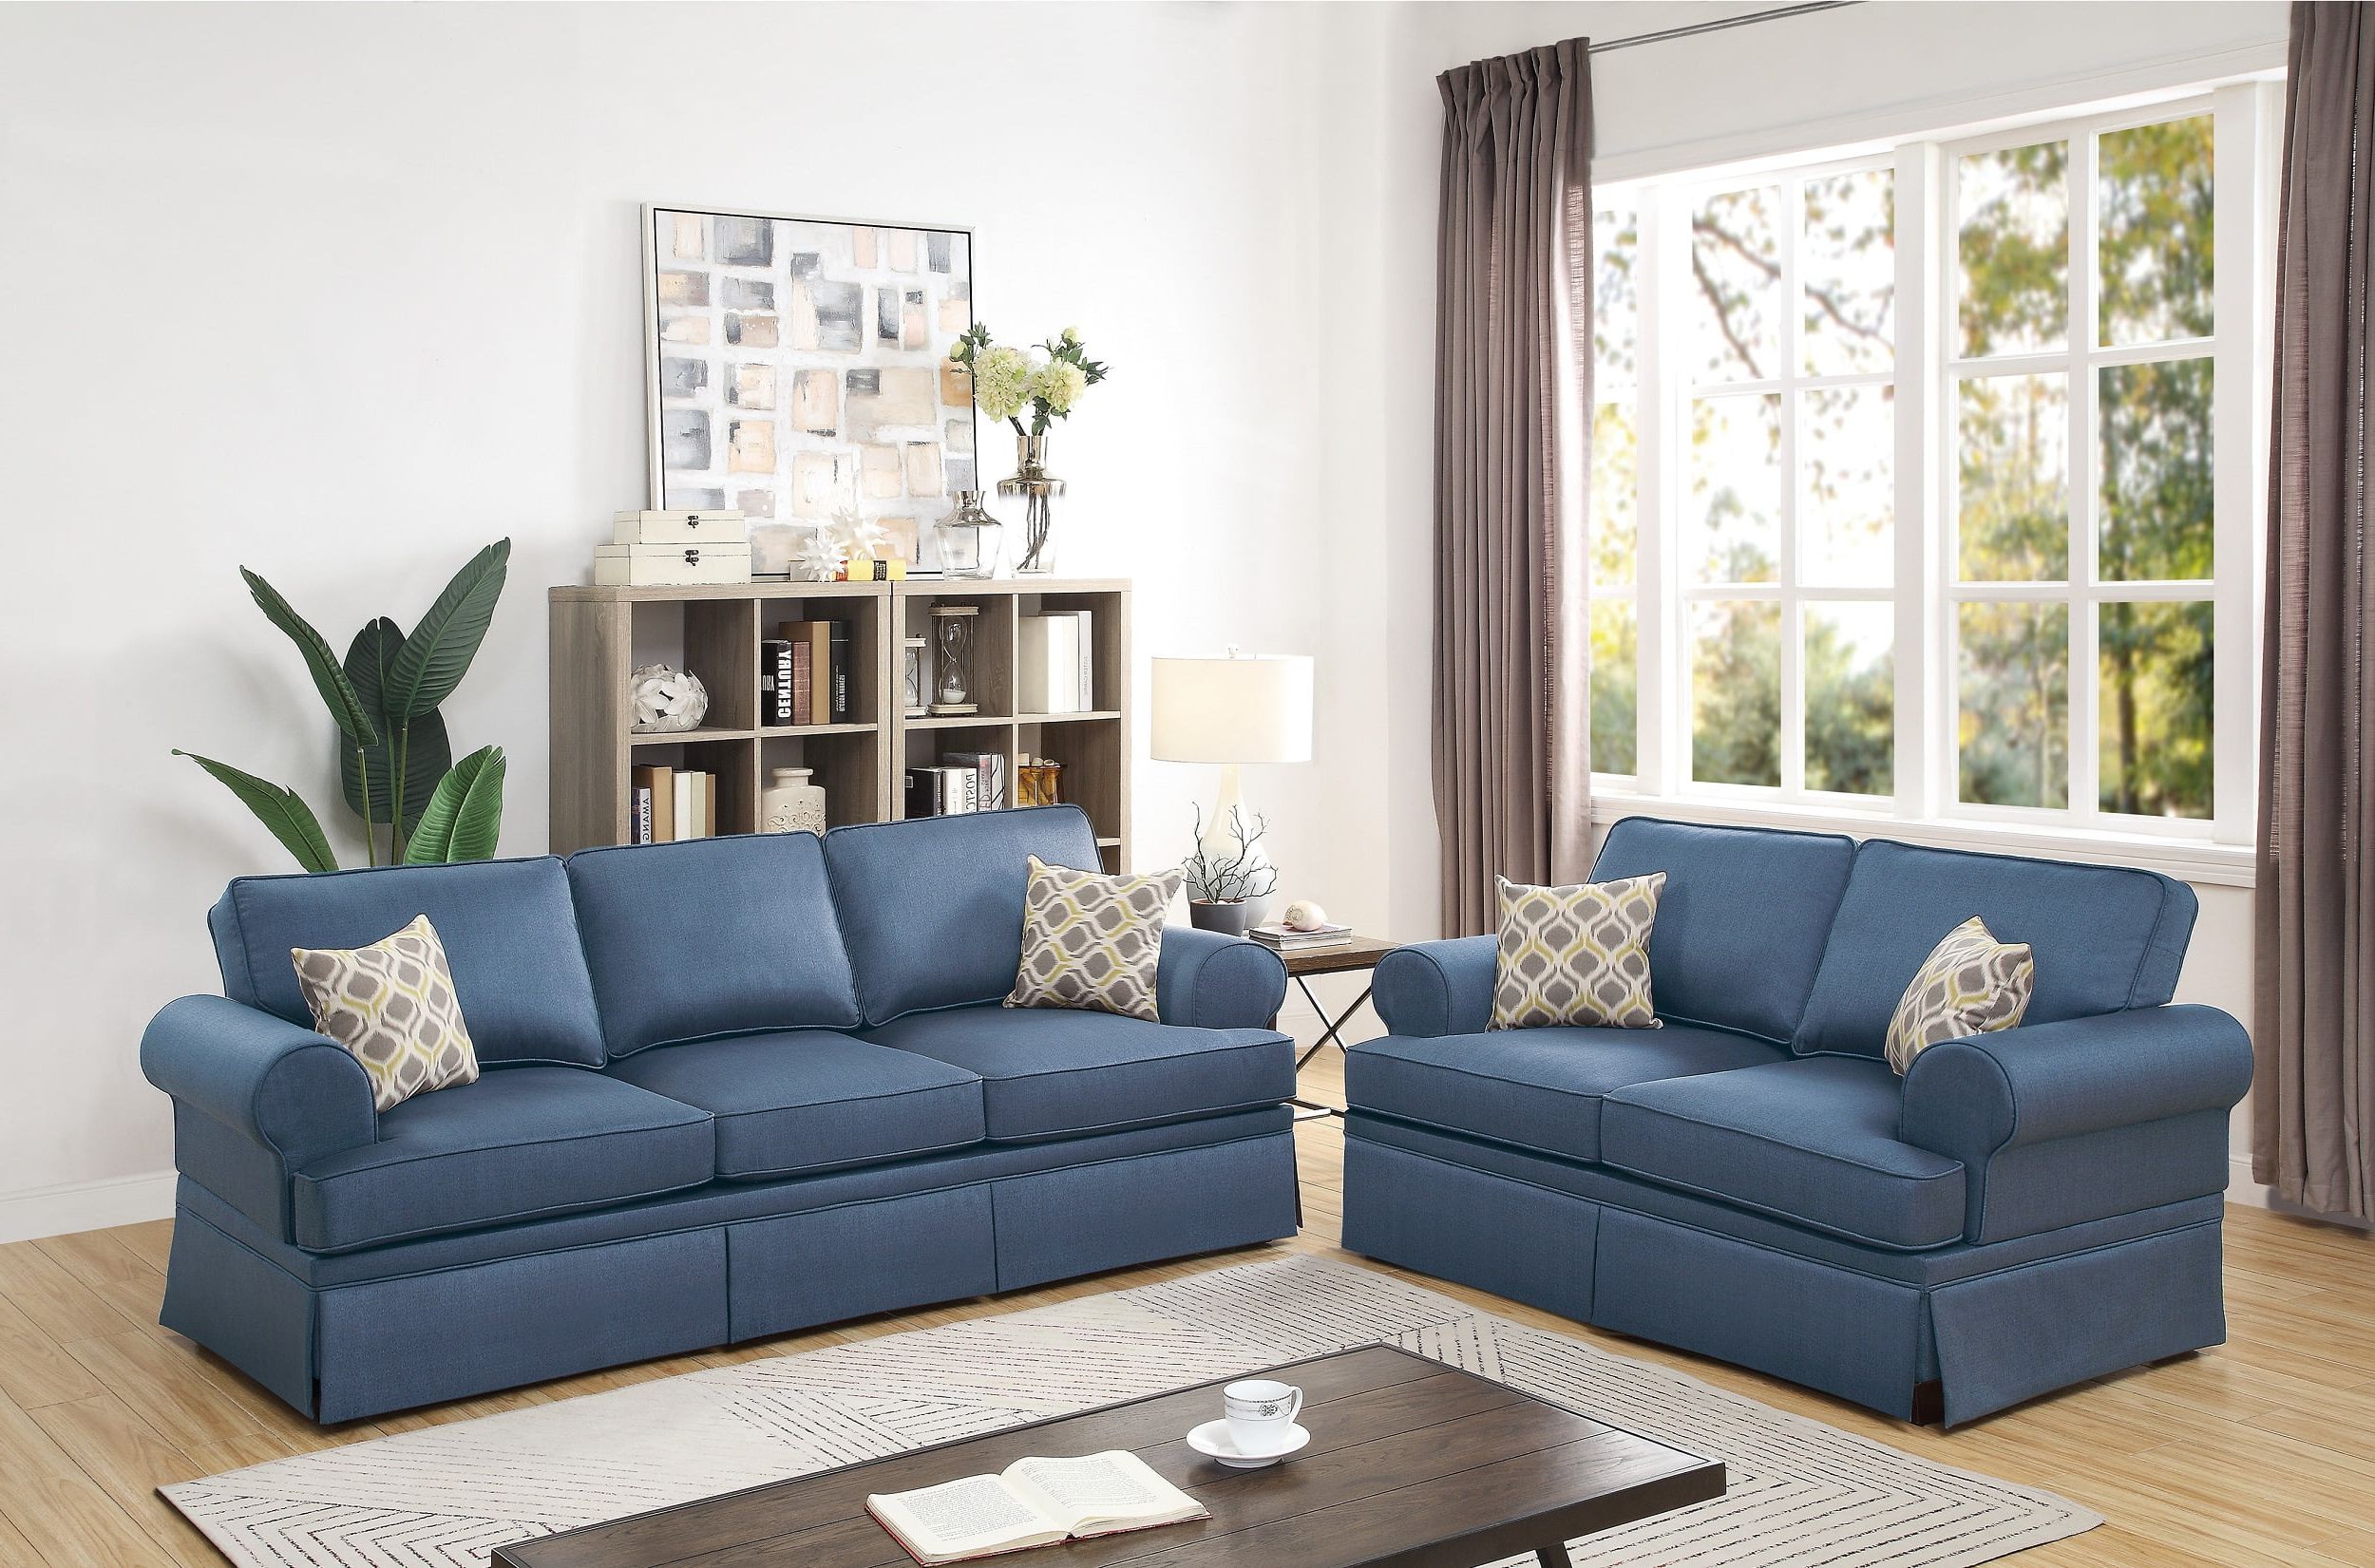 Classic Comfort Cozy Living Room 2pc Sofa Set Sofa And Loveseat Blue Pertaining To Sofas In Blue (View 4 of 20)